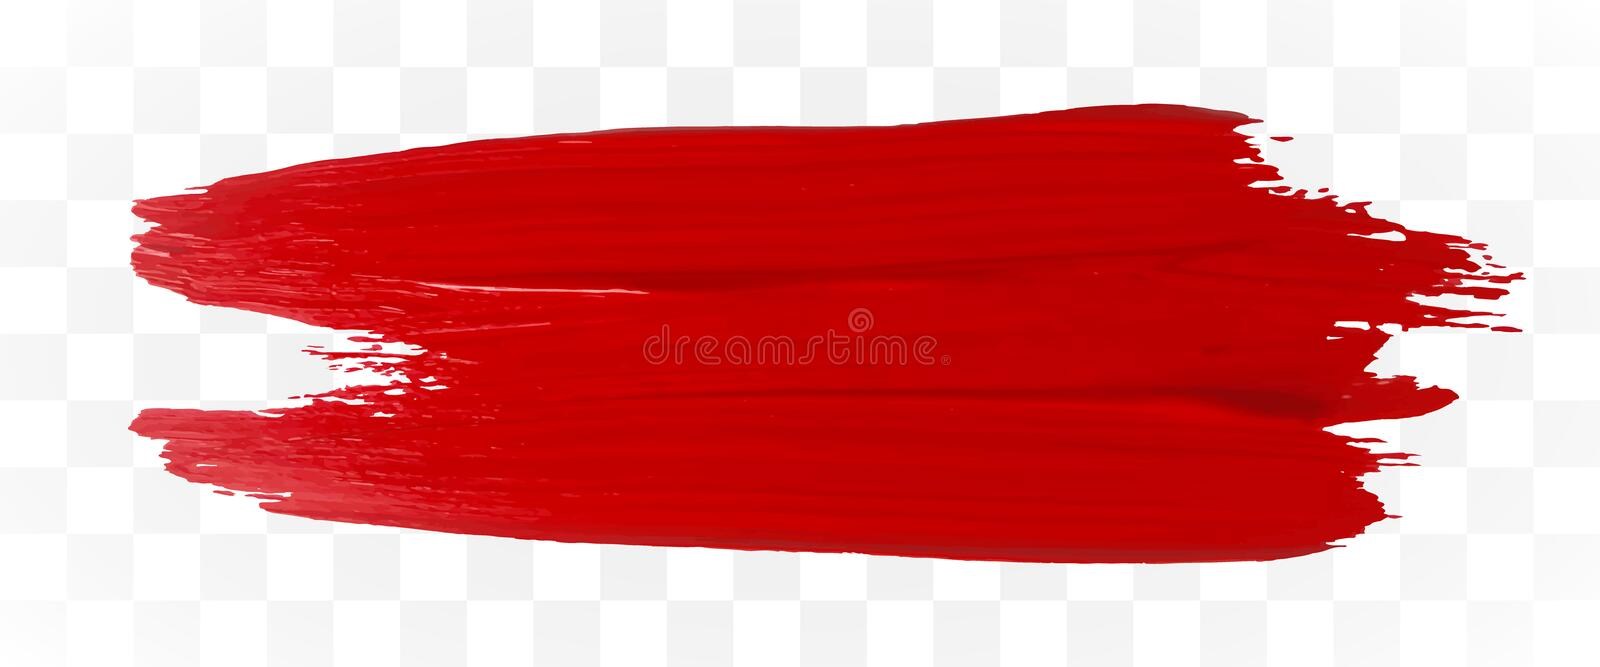 Picture of: Red Brush Stroke on Transparent Background. Paint Stroke